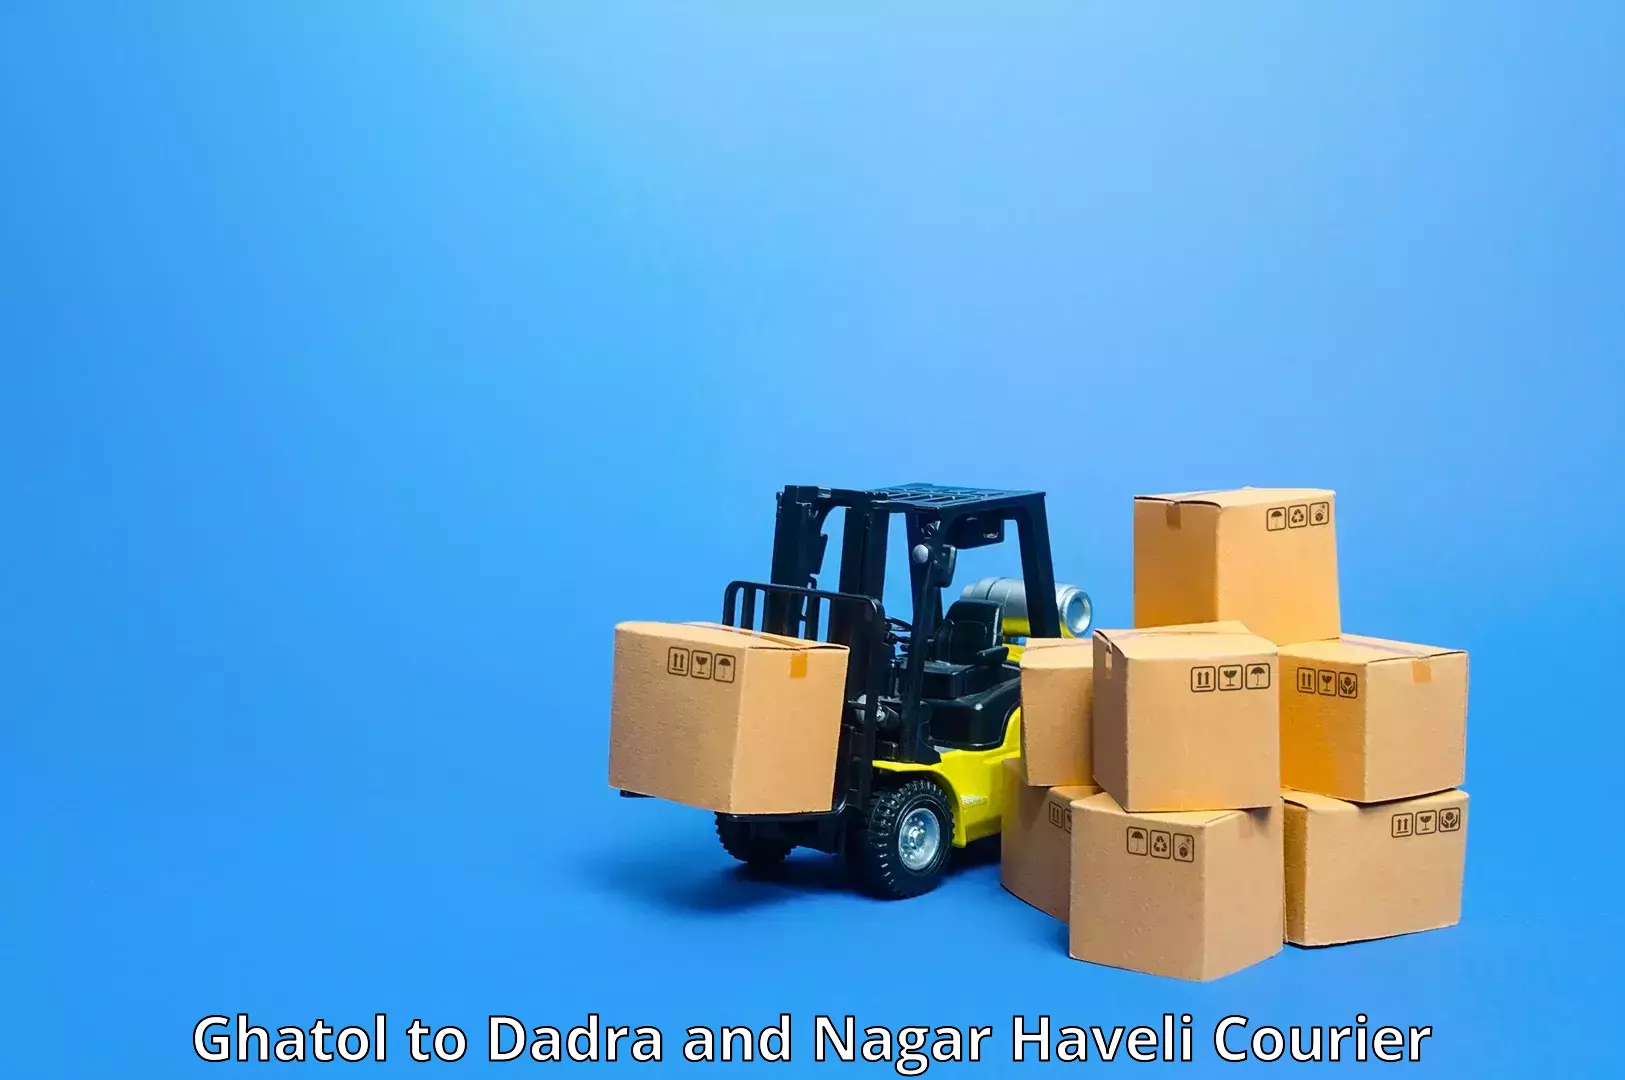 Sustainable shipping practices Ghatol to Dadra and Nagar Haveli